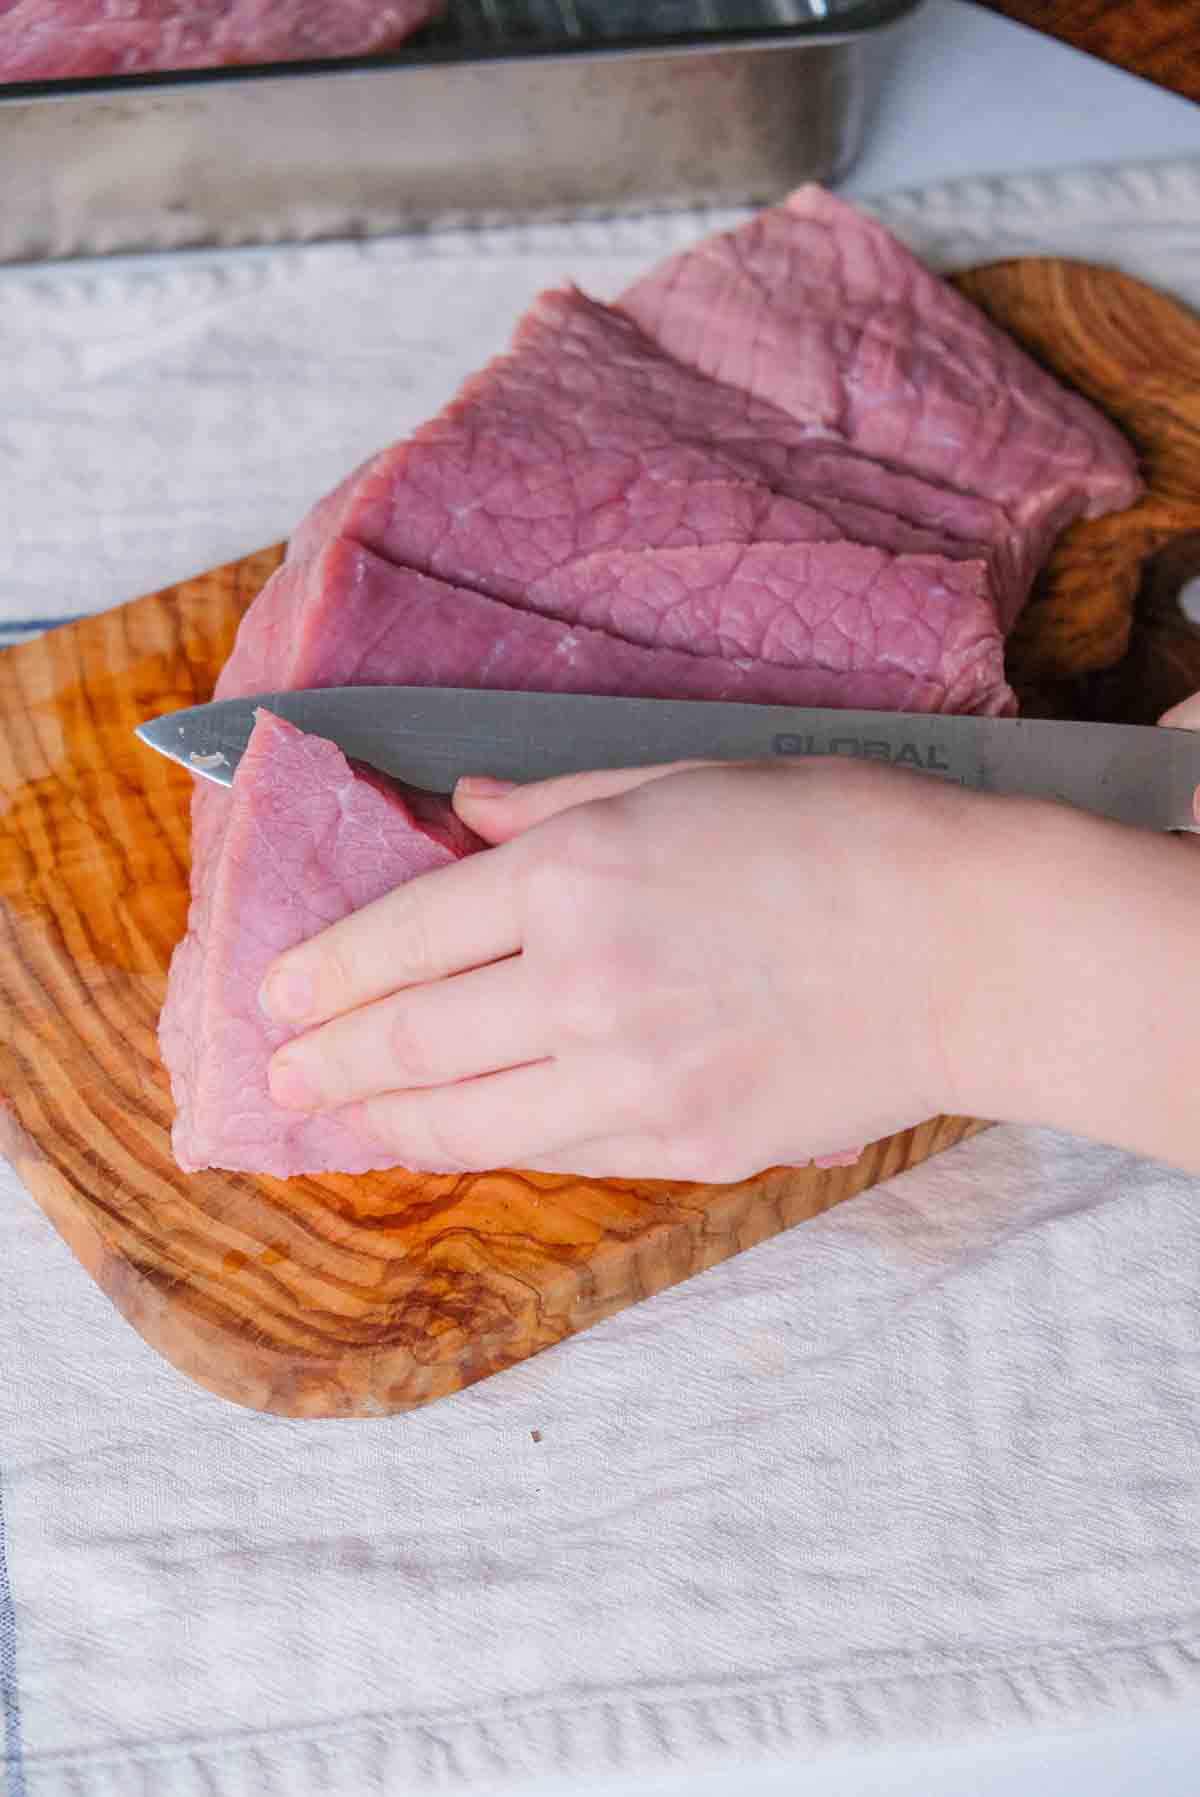 Making a series of cuts into a veal rump in order to flatten it out so it can be trussed.